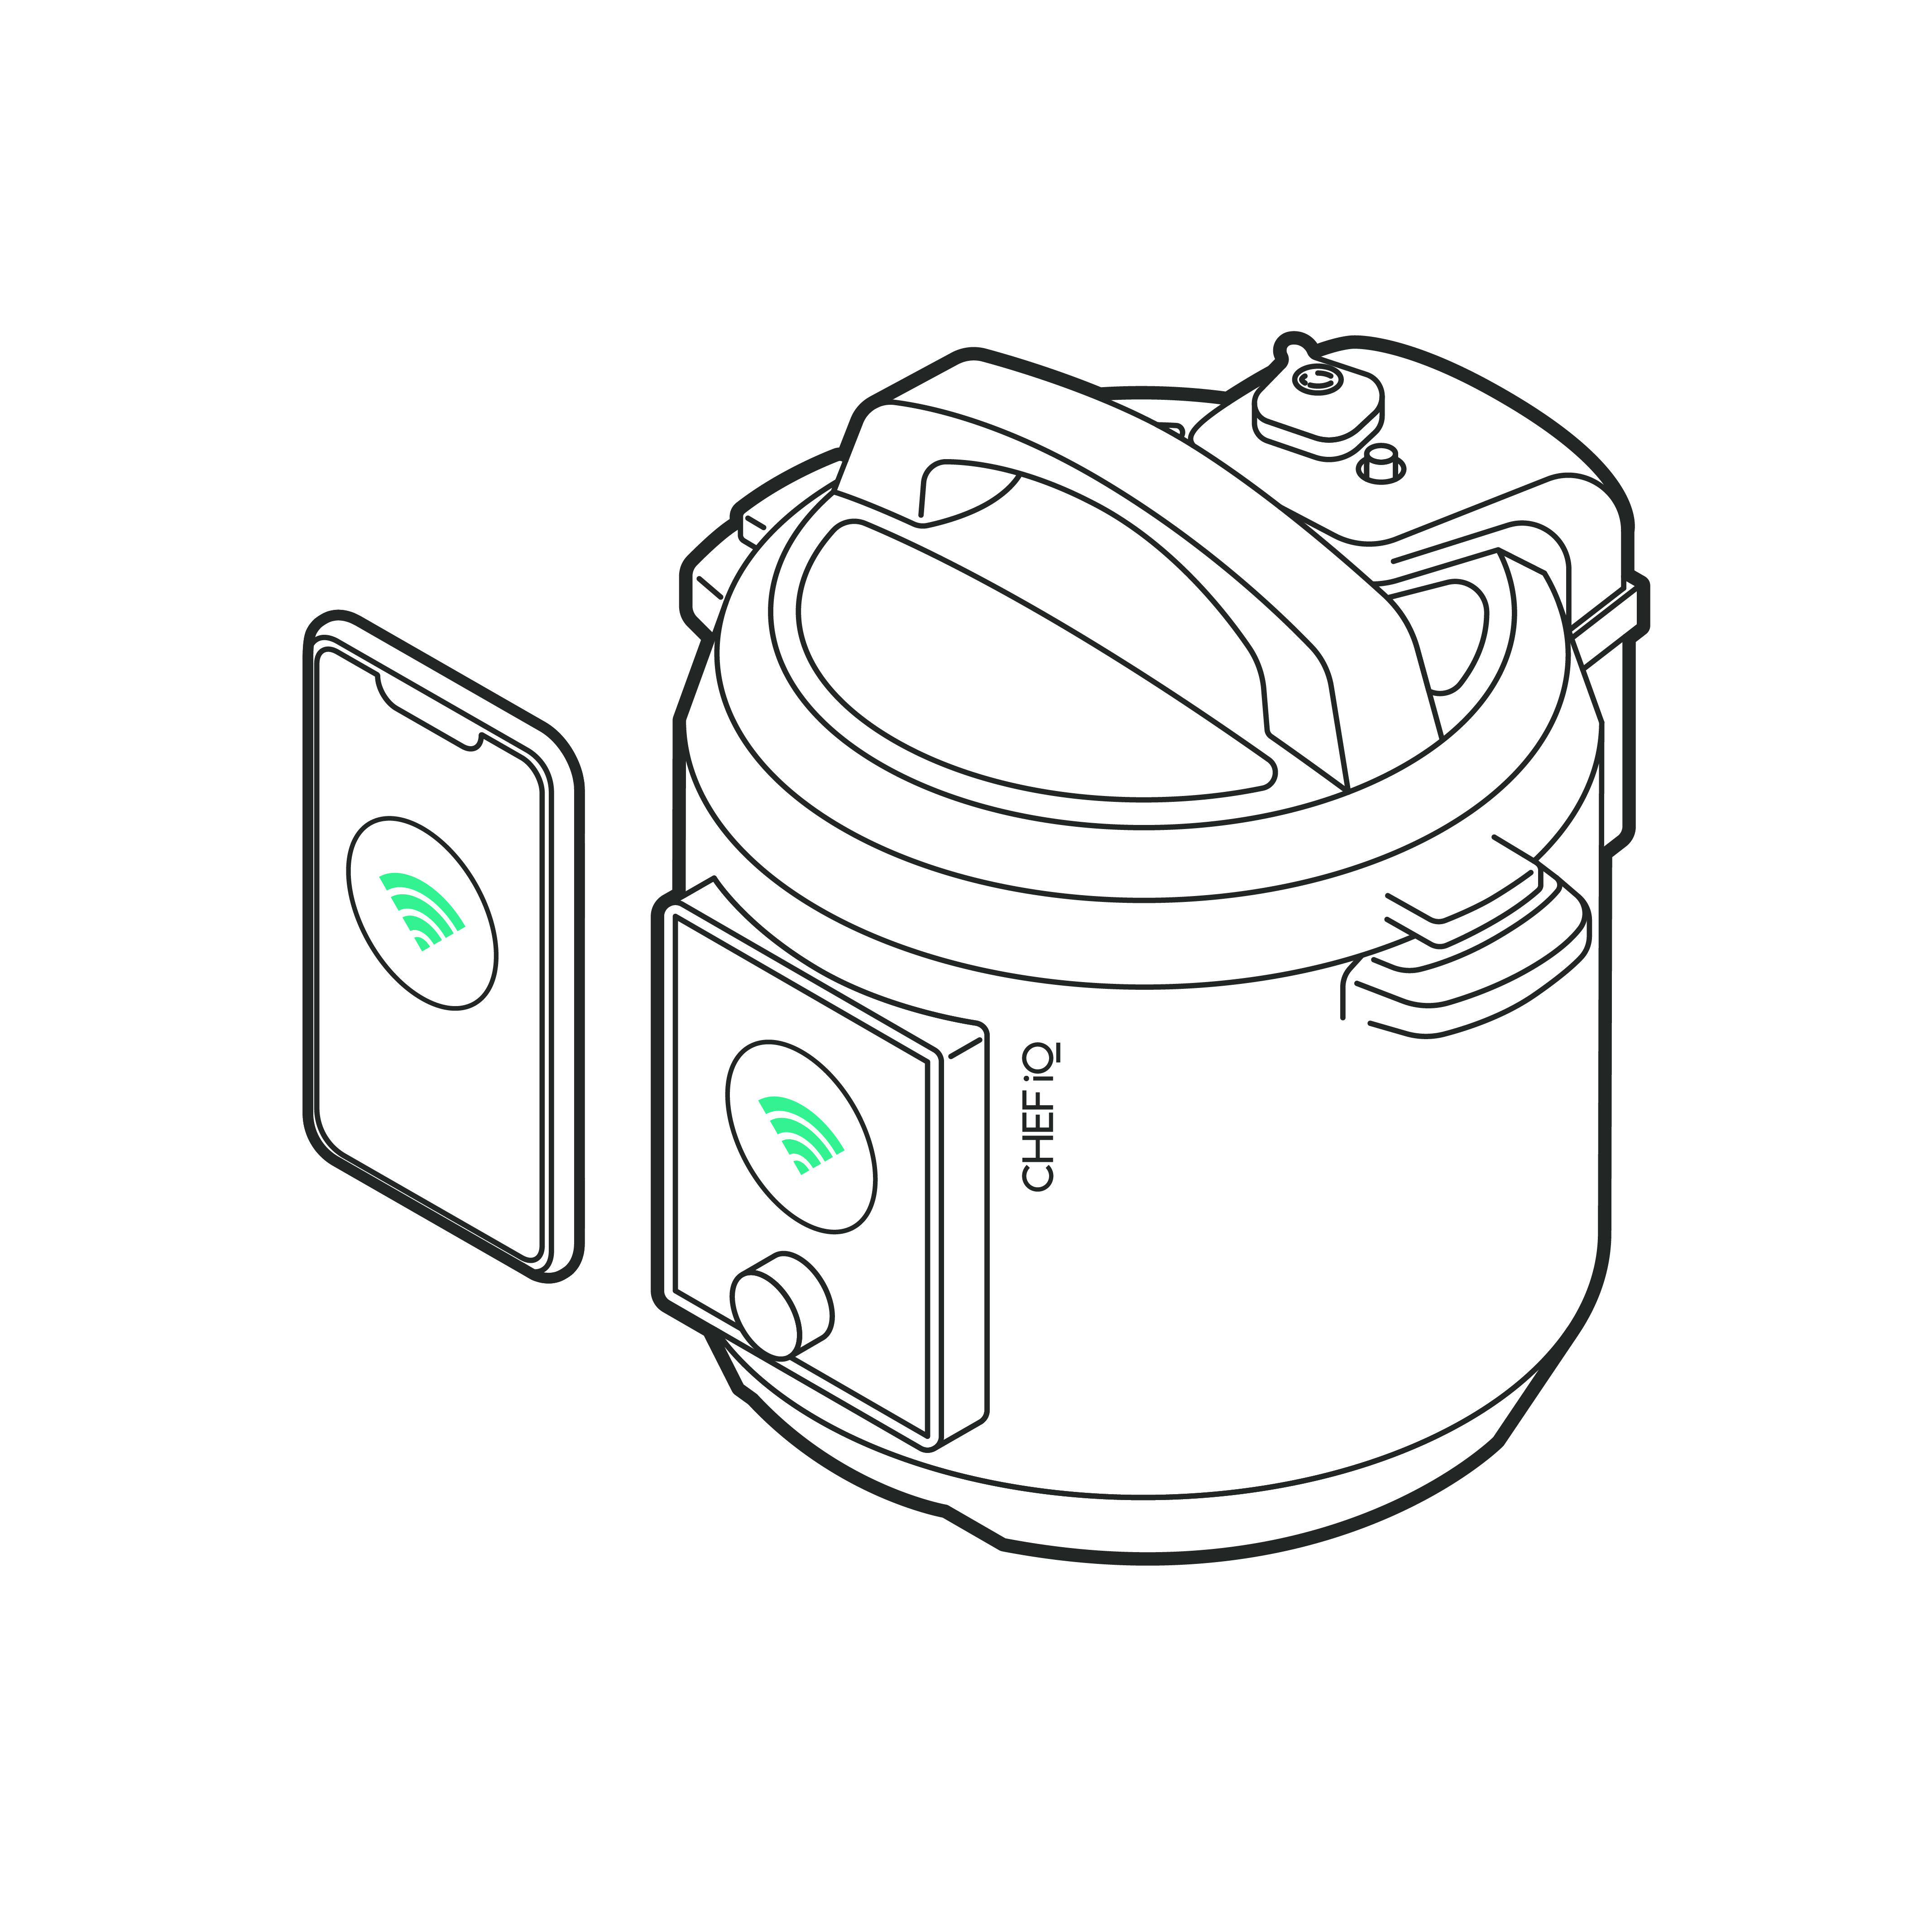 Drawing of connecting Smart Cooker to mobile device over WiFi